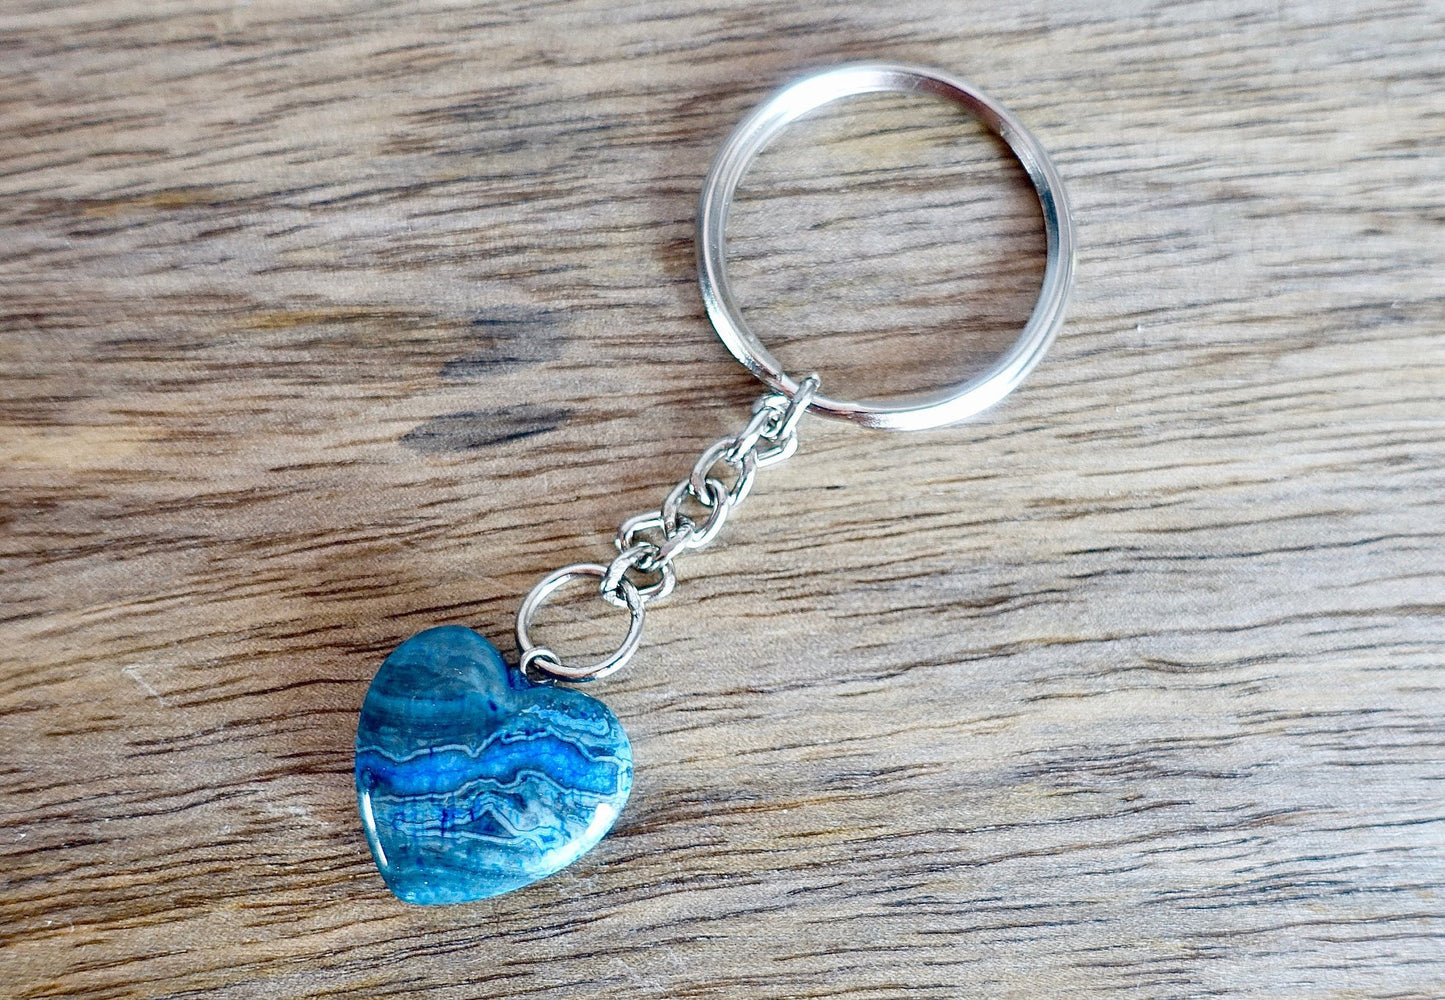 Blue Jasper Keychain Blue Jasper. Blue Jasper Keychain and connect with the stone when you need a moment of spiritual guidance. Blue Jasper Gemstone Heart Keychain, Crystal Keychain at Magic Crystals. Free shipping available. We carry a wide variety of keychains, gemstones, bracelets, earrings and handmade jewelry. 